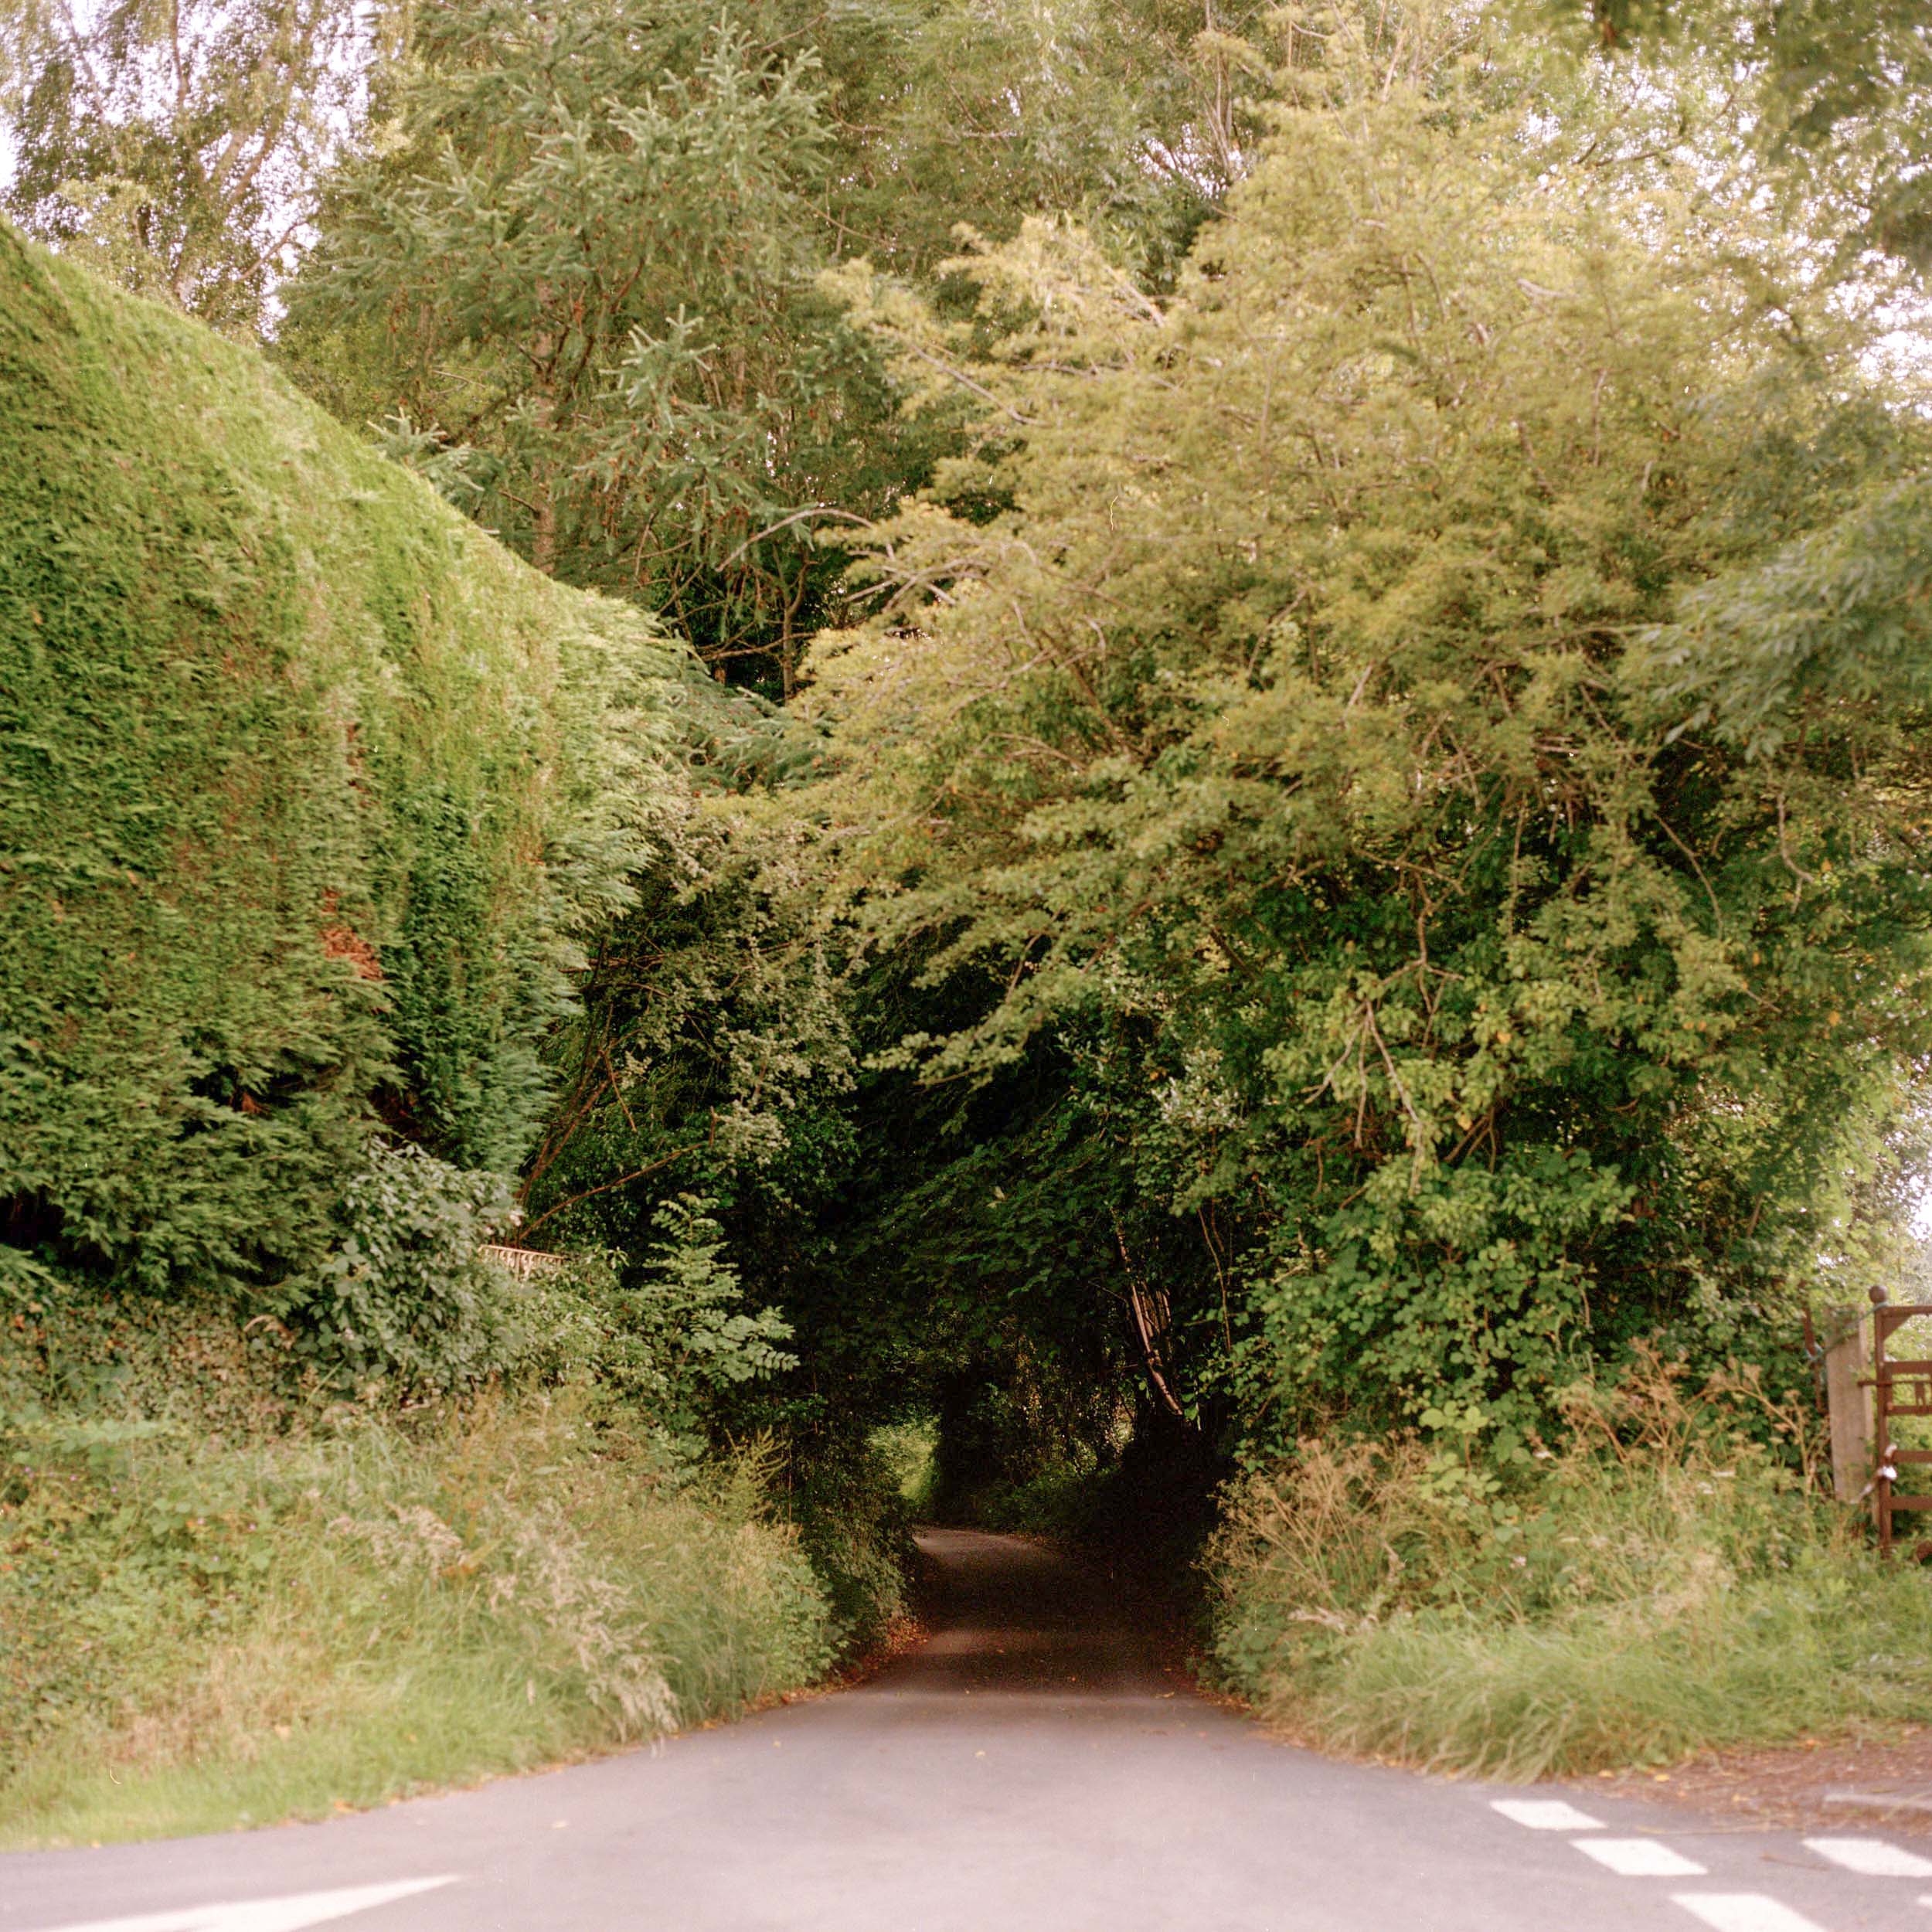 A-LEAFY-SUMMER-ROAD-IN-HEREFORDSHIRE-ENGLAND